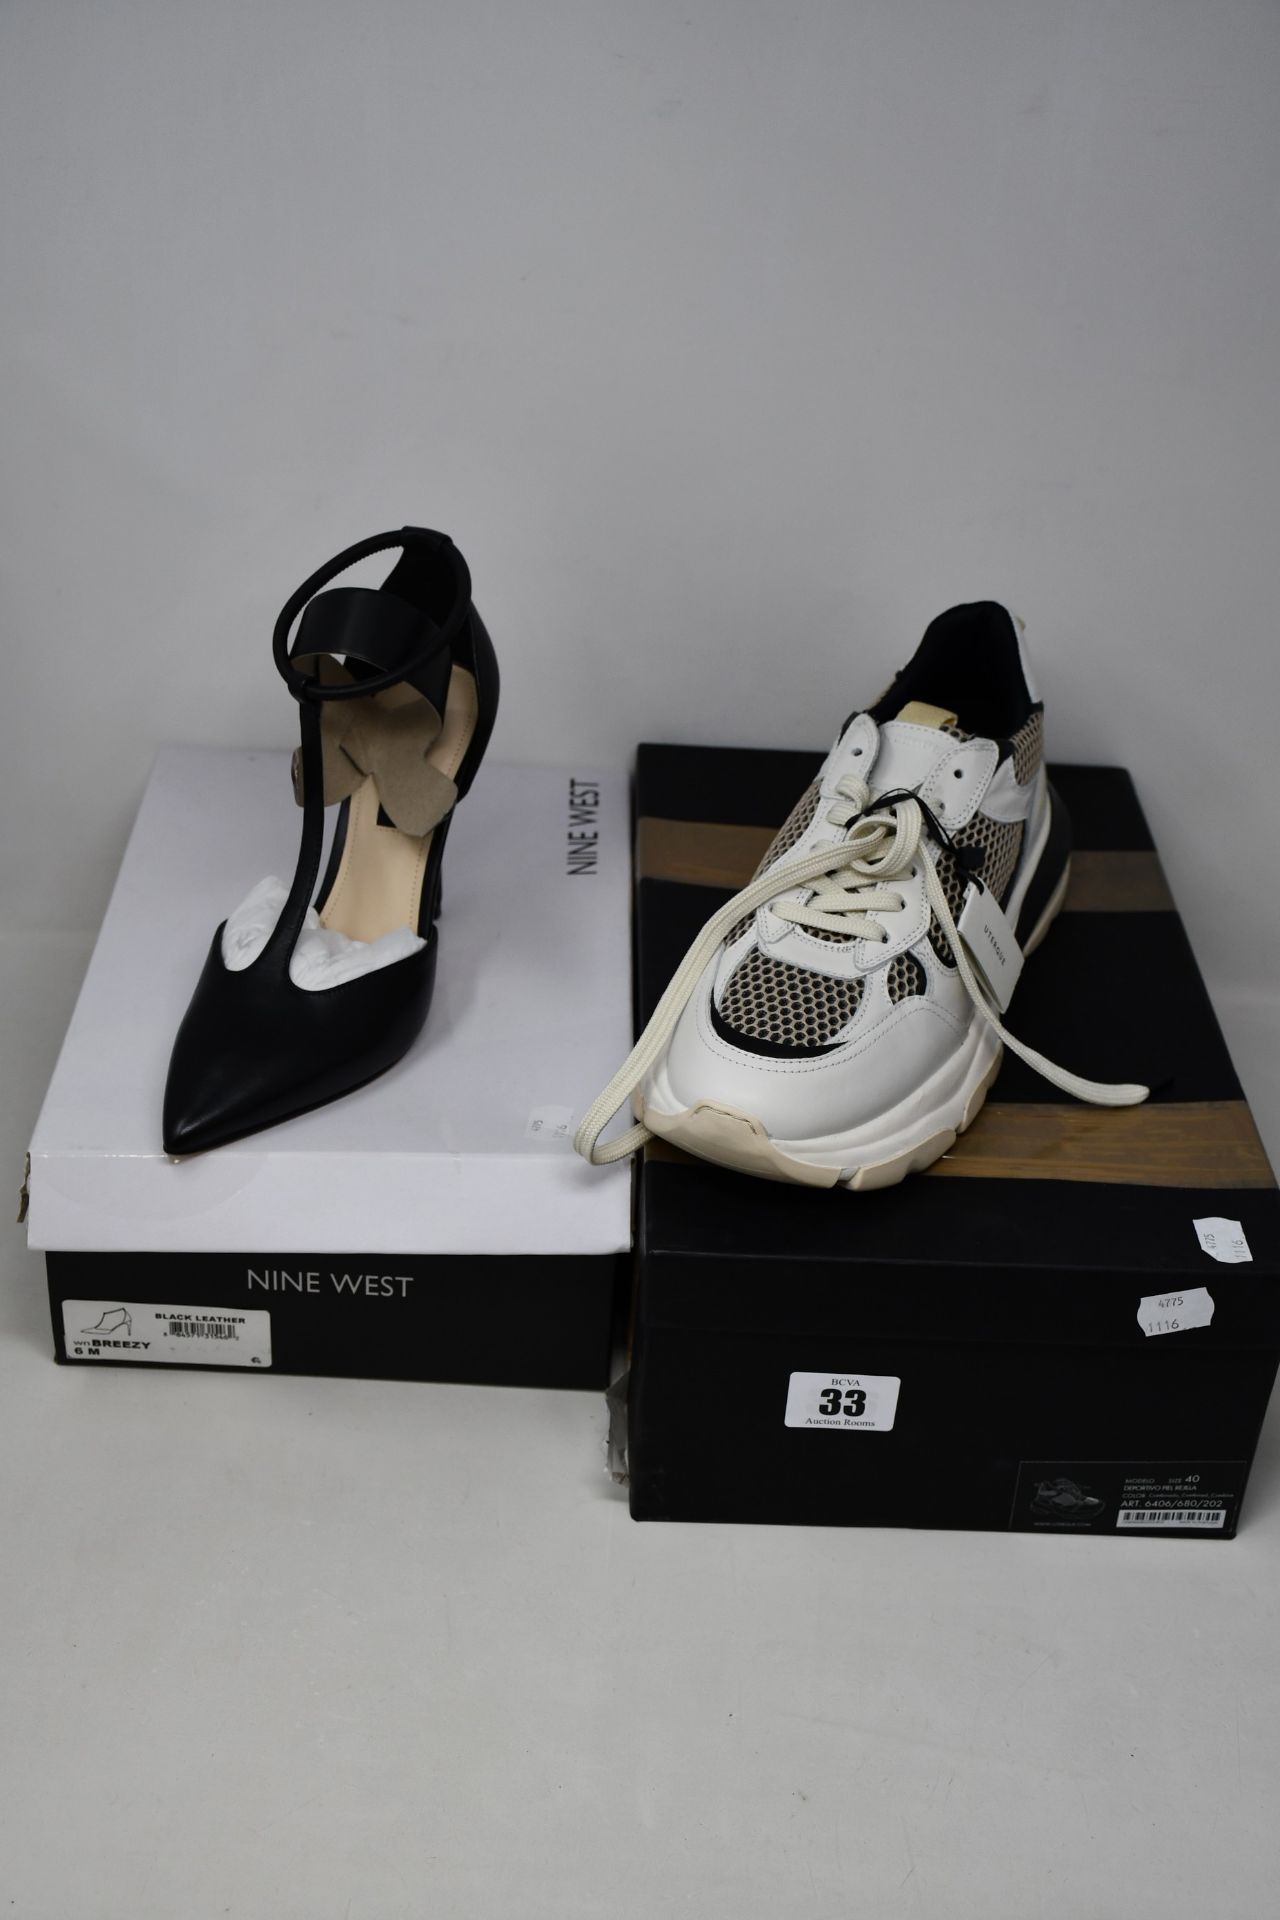 A pair of as new Uterque Deportivo Piel Rejilla trainers (EU 40) together with a pair of Nine West